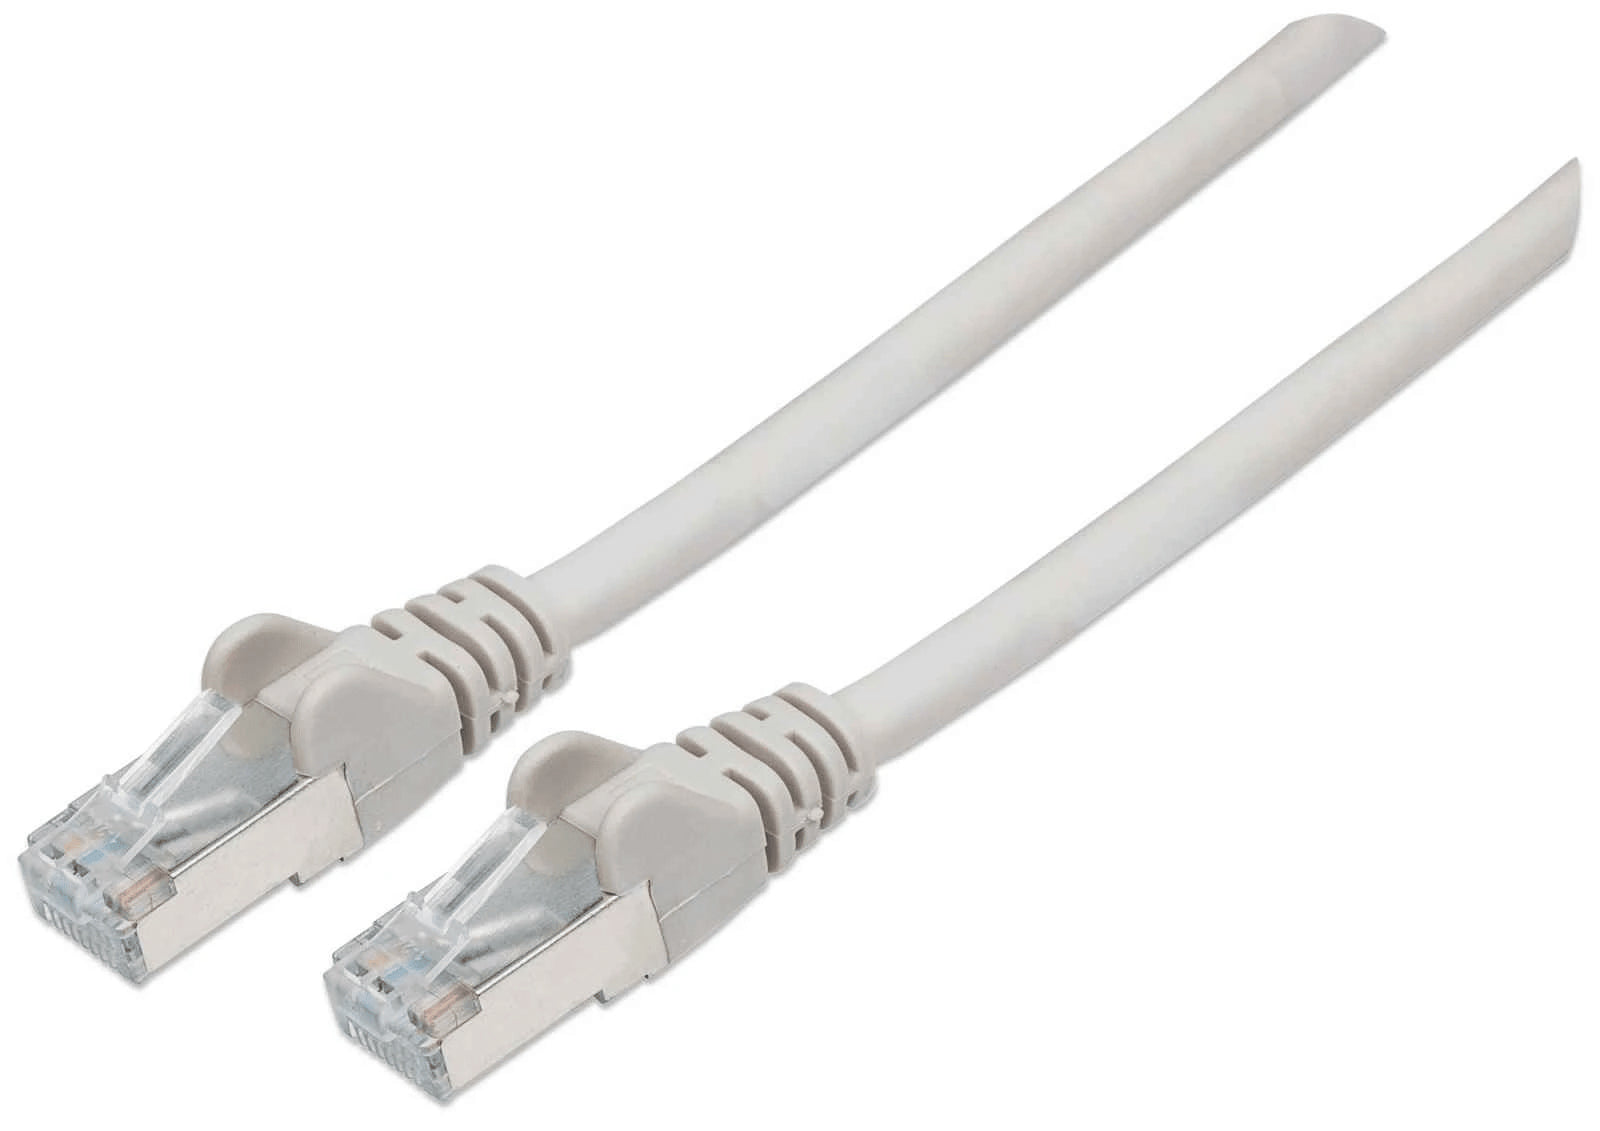 Intellinet Network Patch Cable, Cat7 Cable/Cat6A Plugs, 1m, Grey, Copper, S/FTP, LSOH / LSZH, PVC, RJ45, Gold Plated Contacts, Snagless, Booted, Lifetime Warranty, Polybag